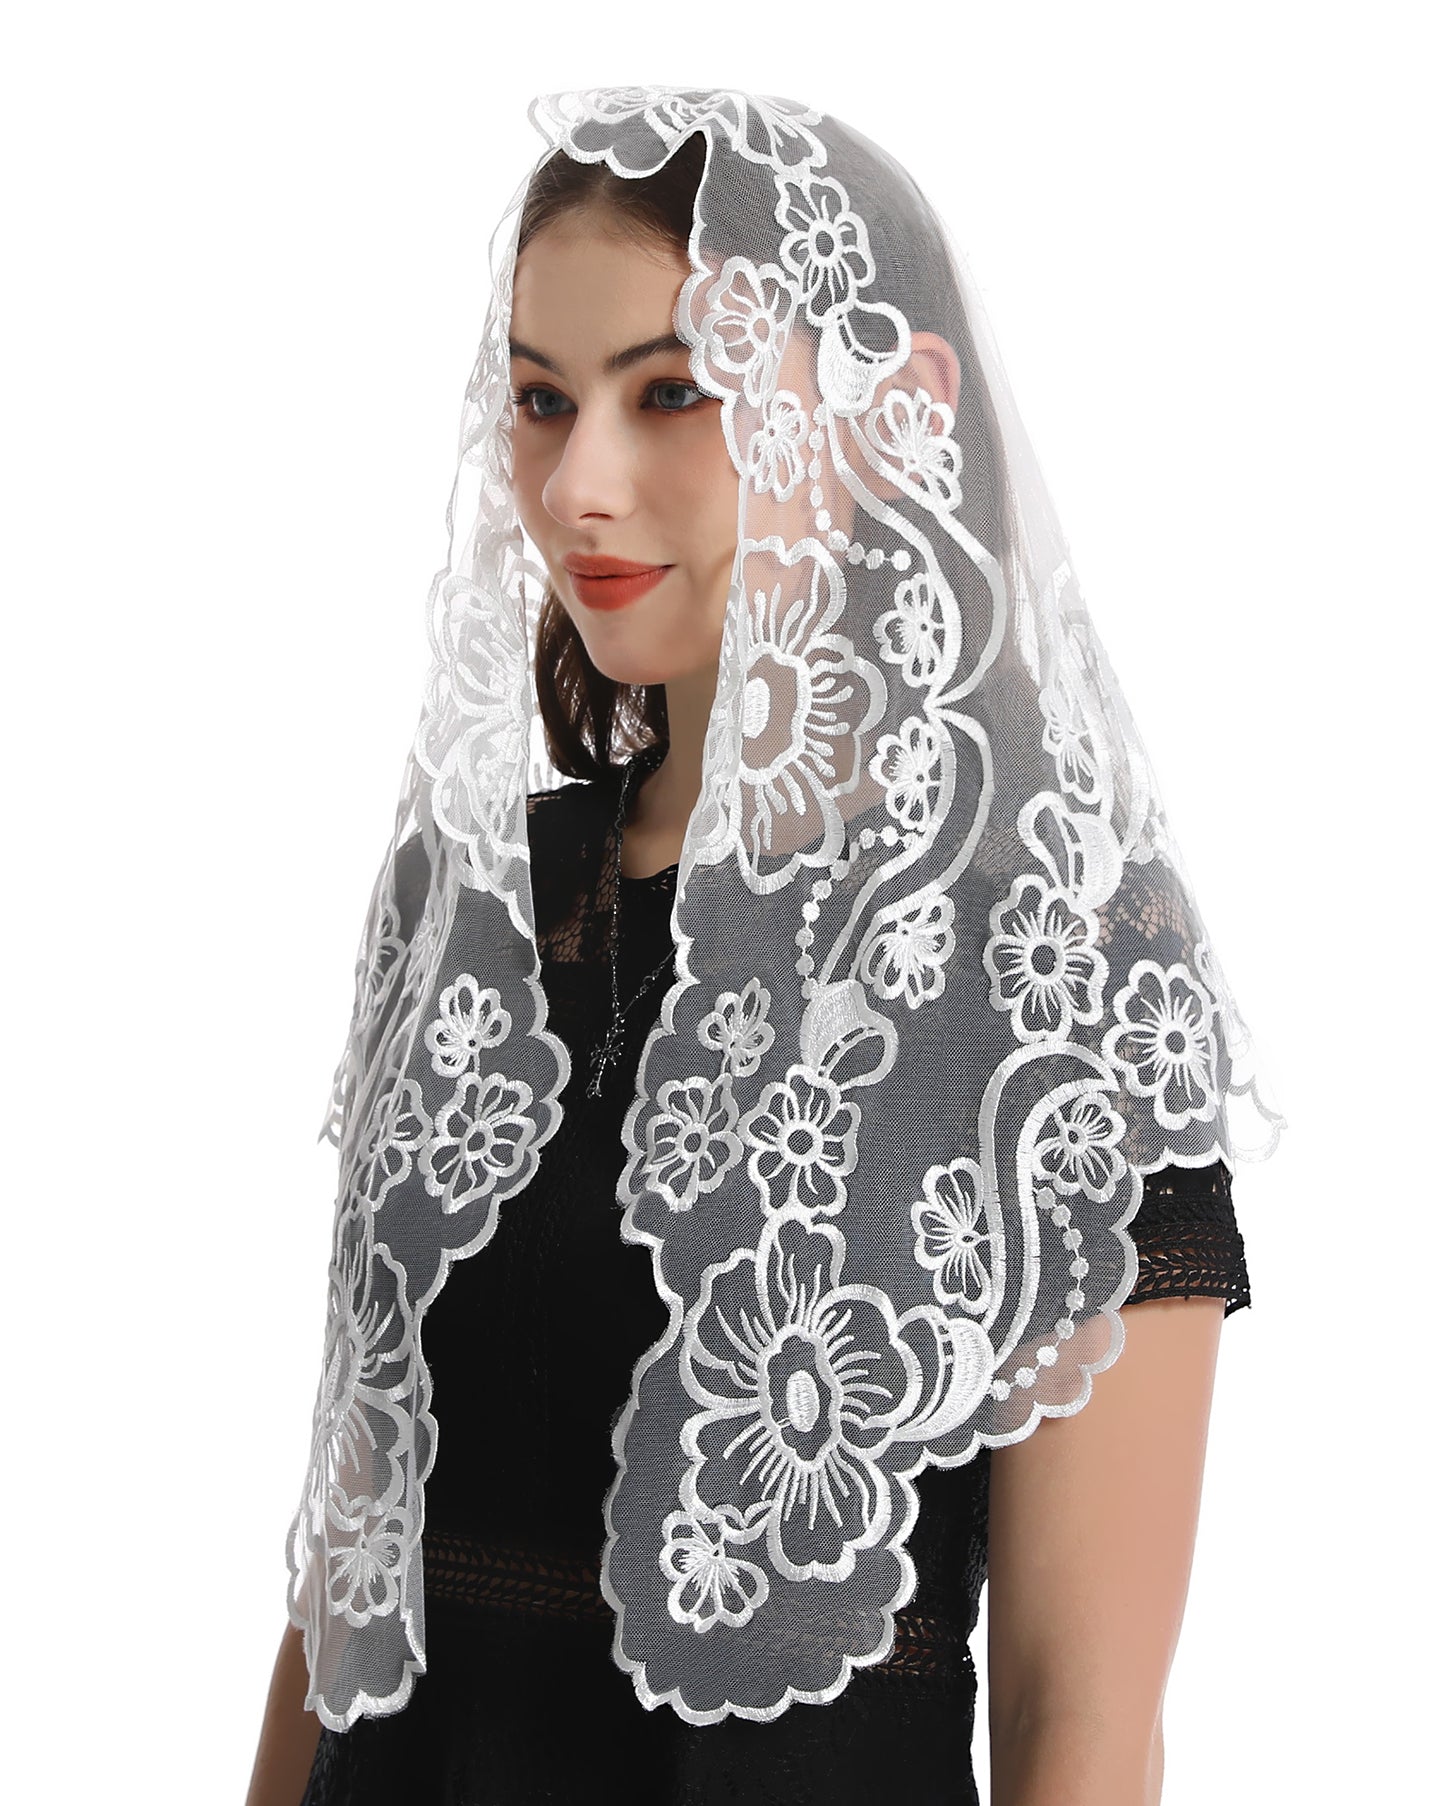 Bozidol Triangle Church Head Covering - Madonna Camellia Embroidered Veil Chapel Veil for women